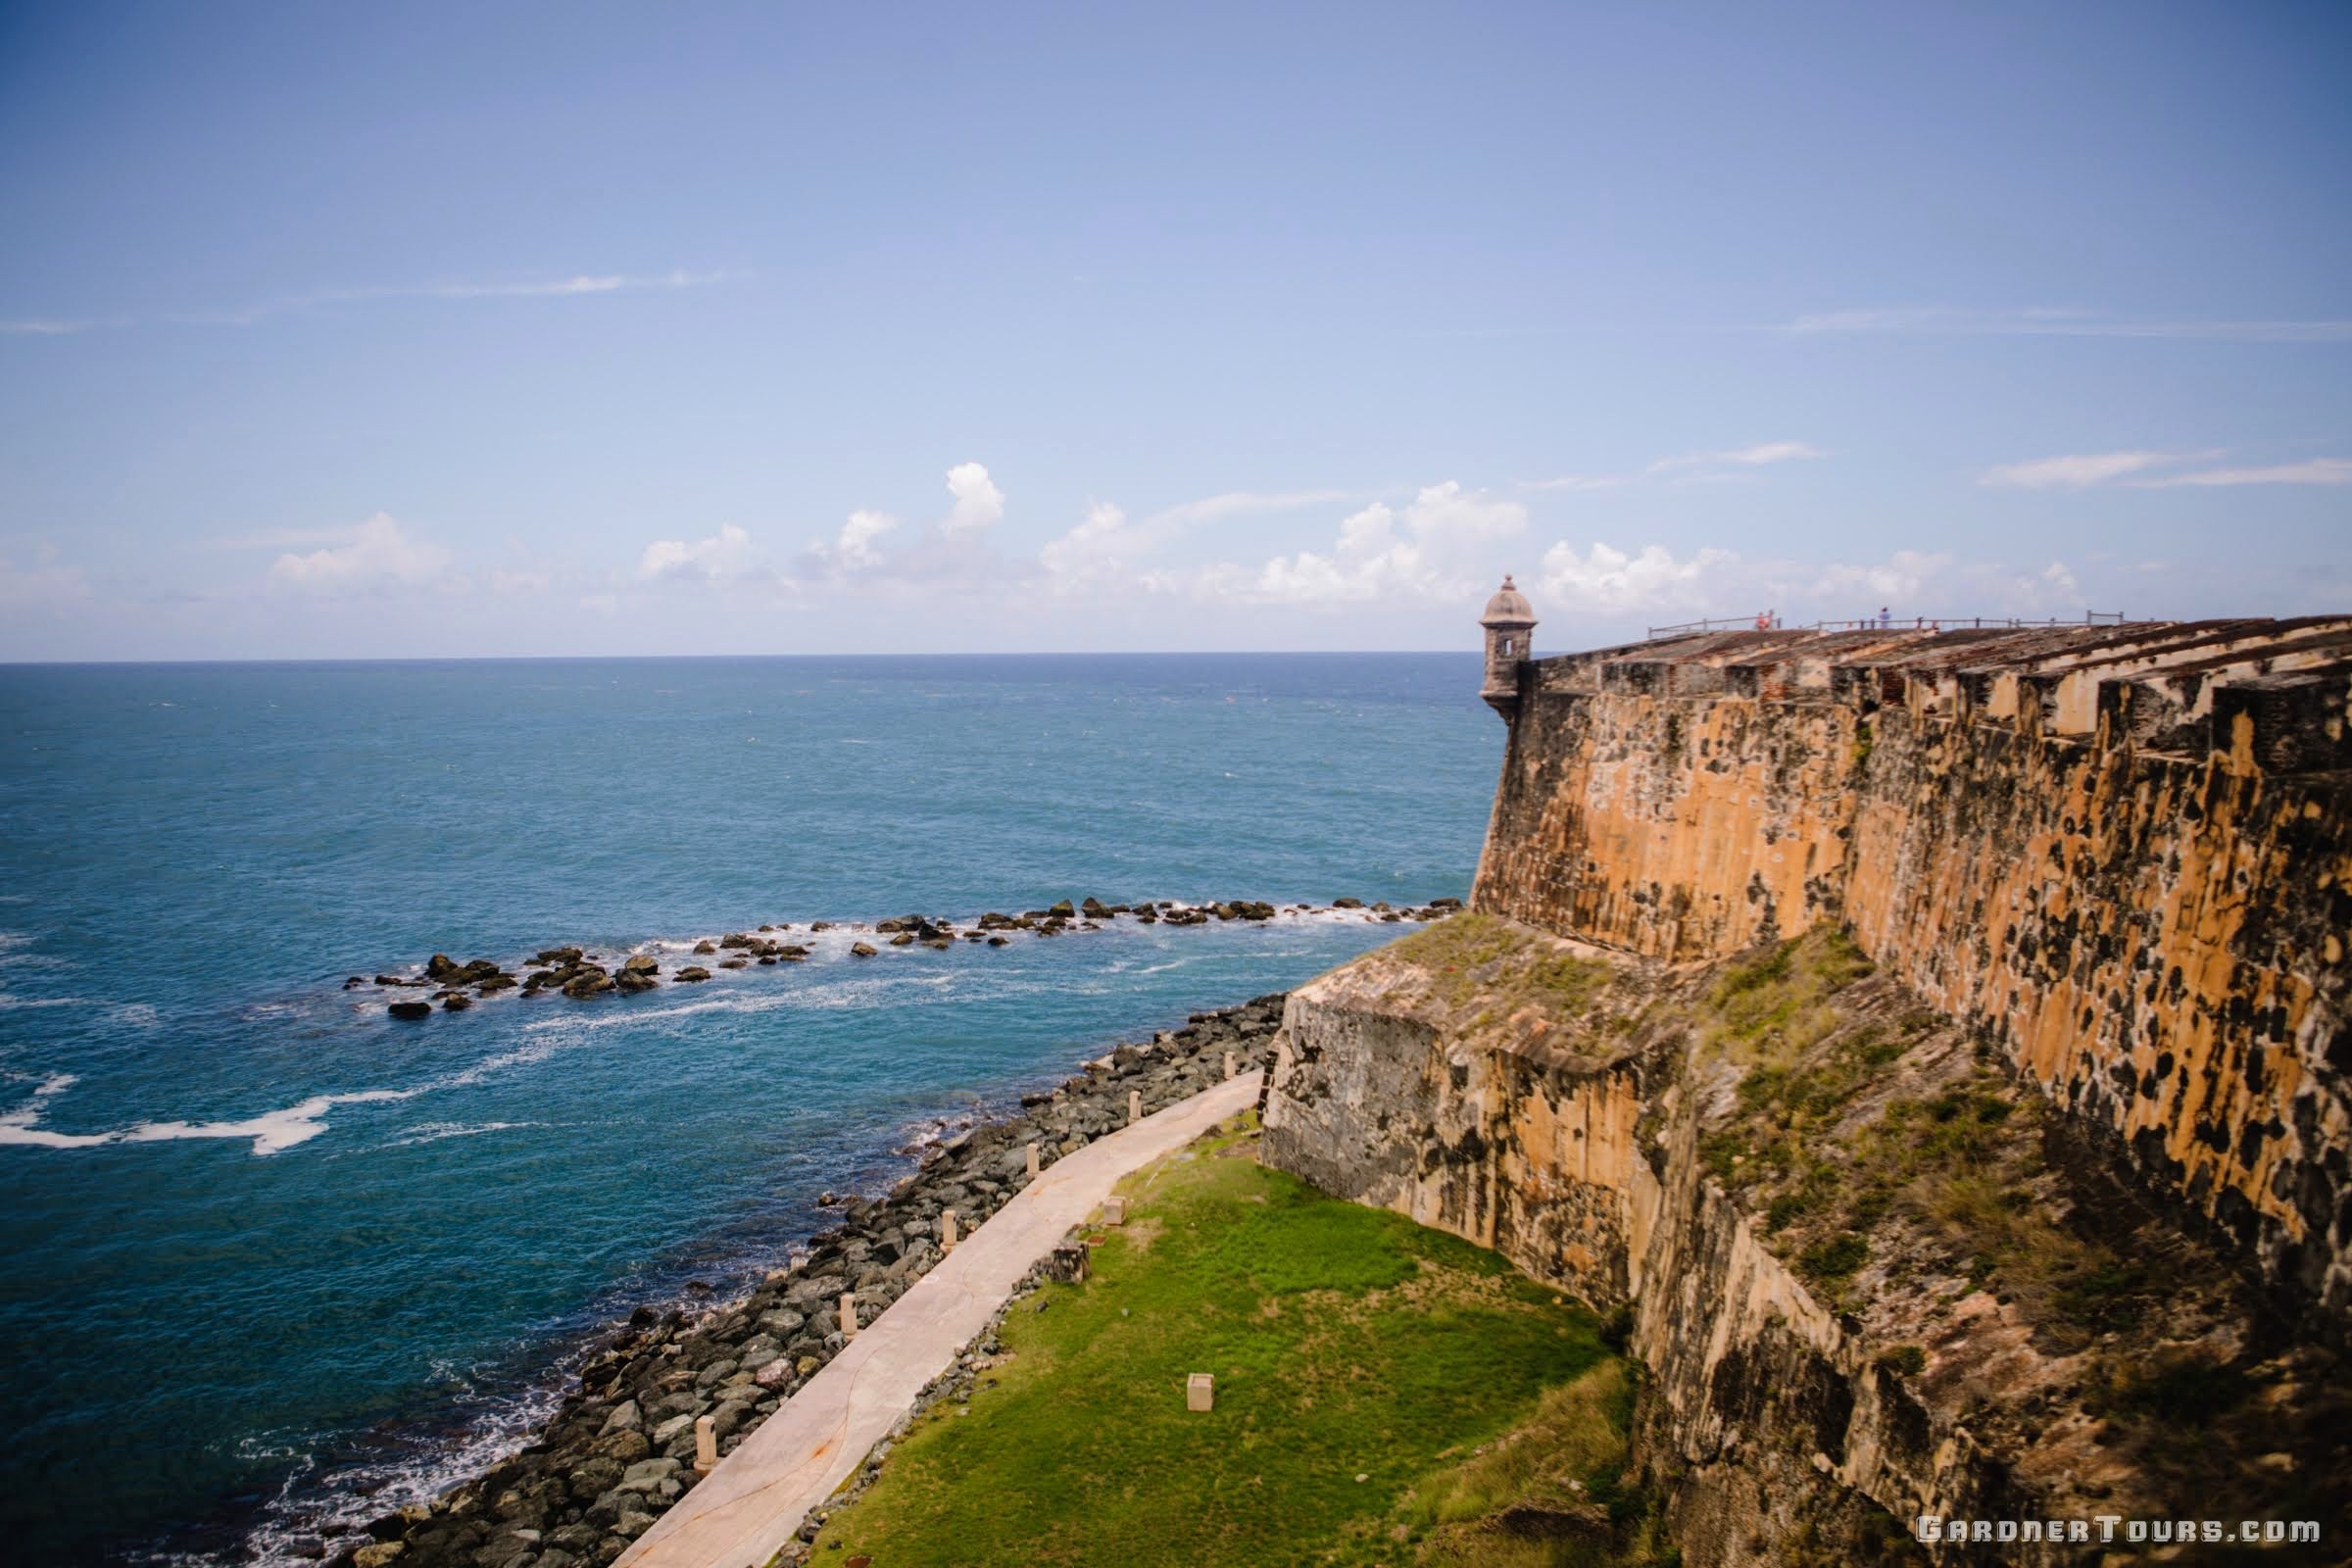 A beautiful view from a window in the El Morro Castle in San Juan Puerto Rico with part of the castle and the waters in view